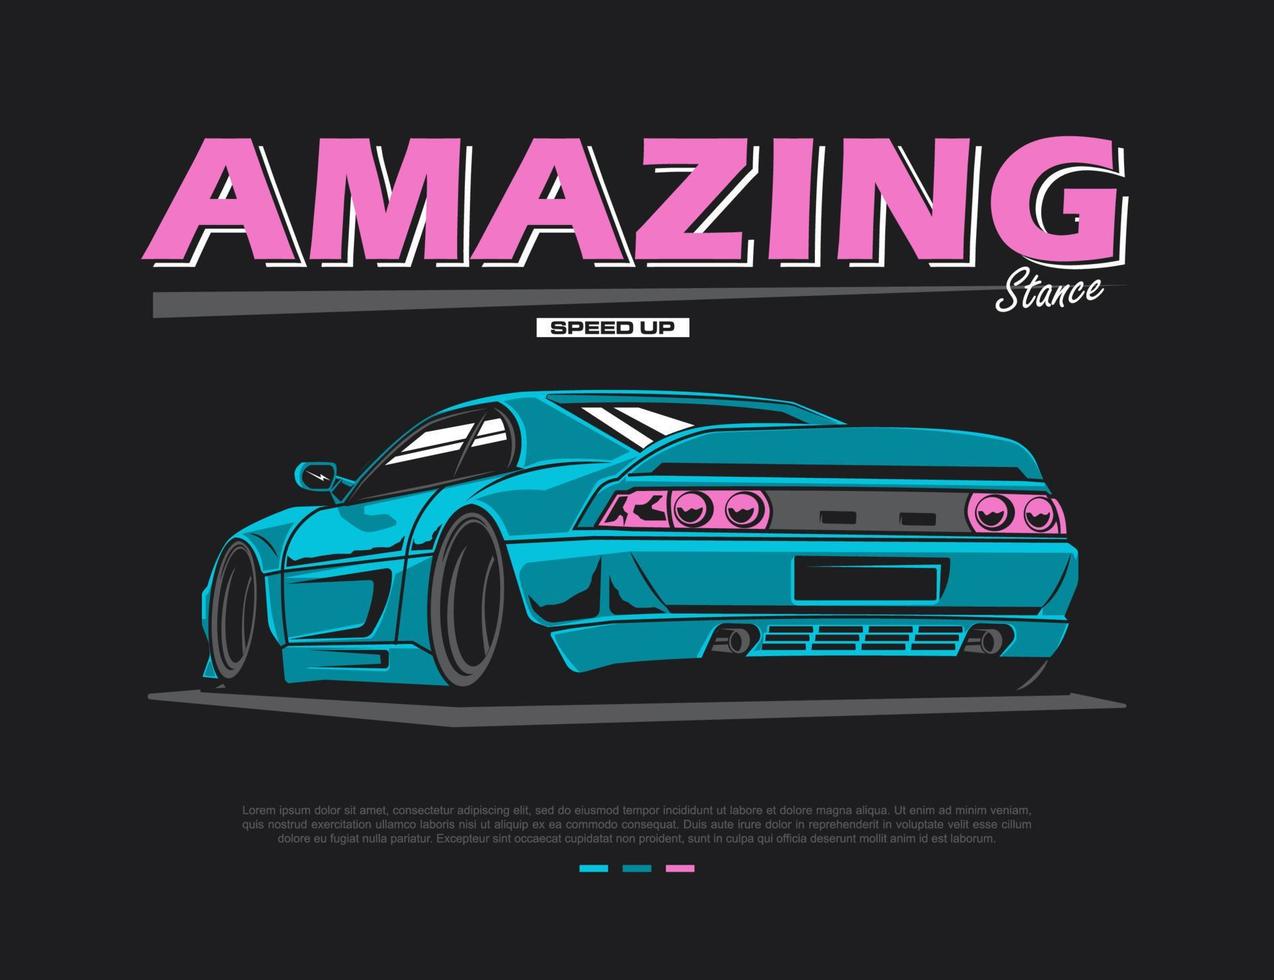 90s vibe car illustration design graphic vector in dark background along with perfect text